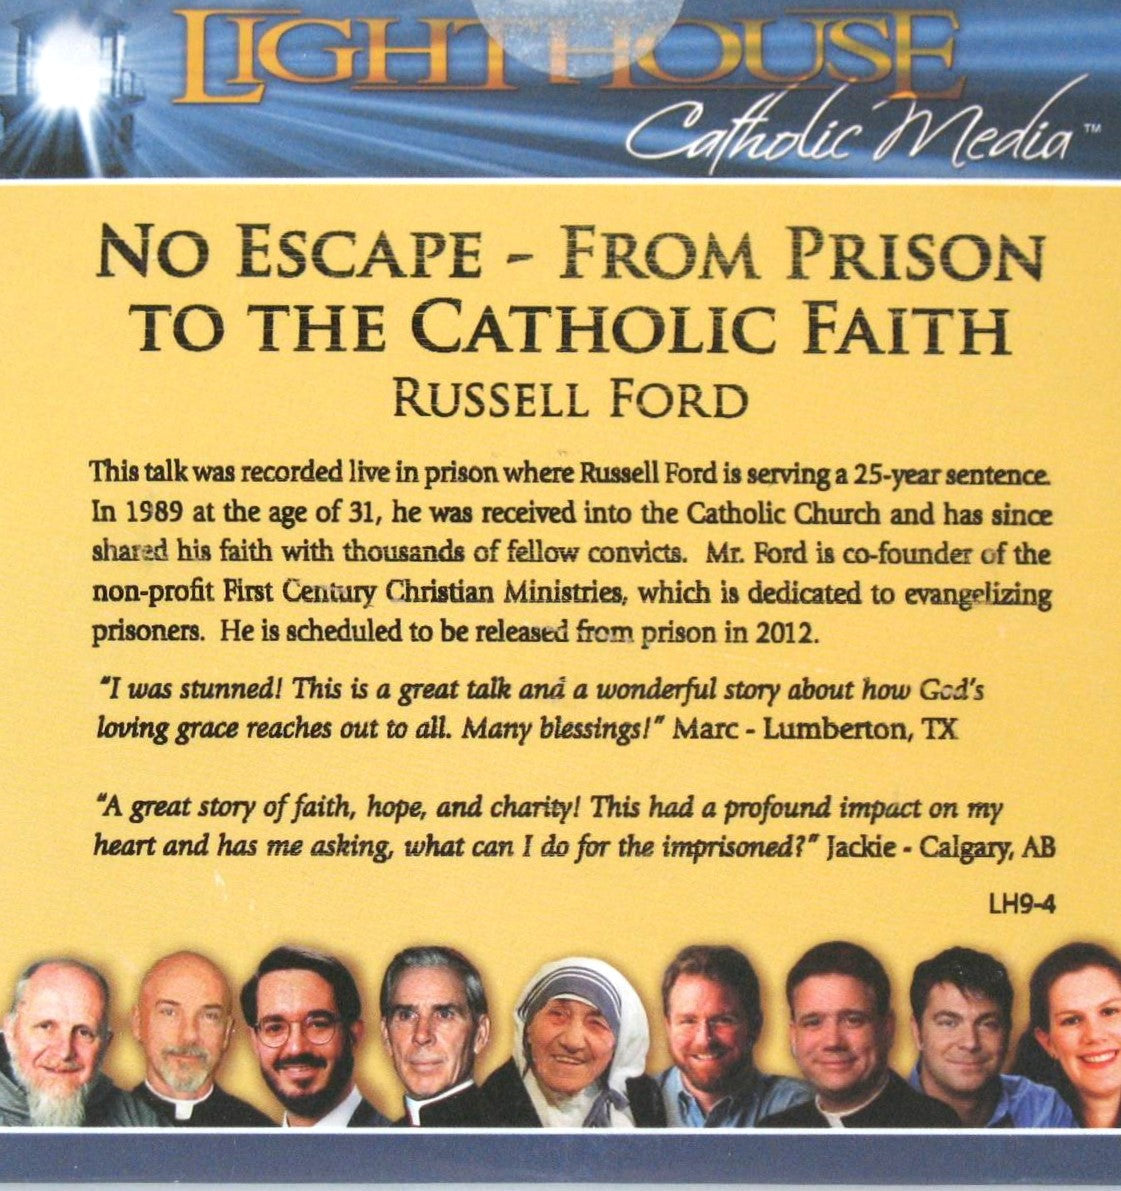 No Escape- From Prison to the Catholic Faith - CD Talk by Russell Ford